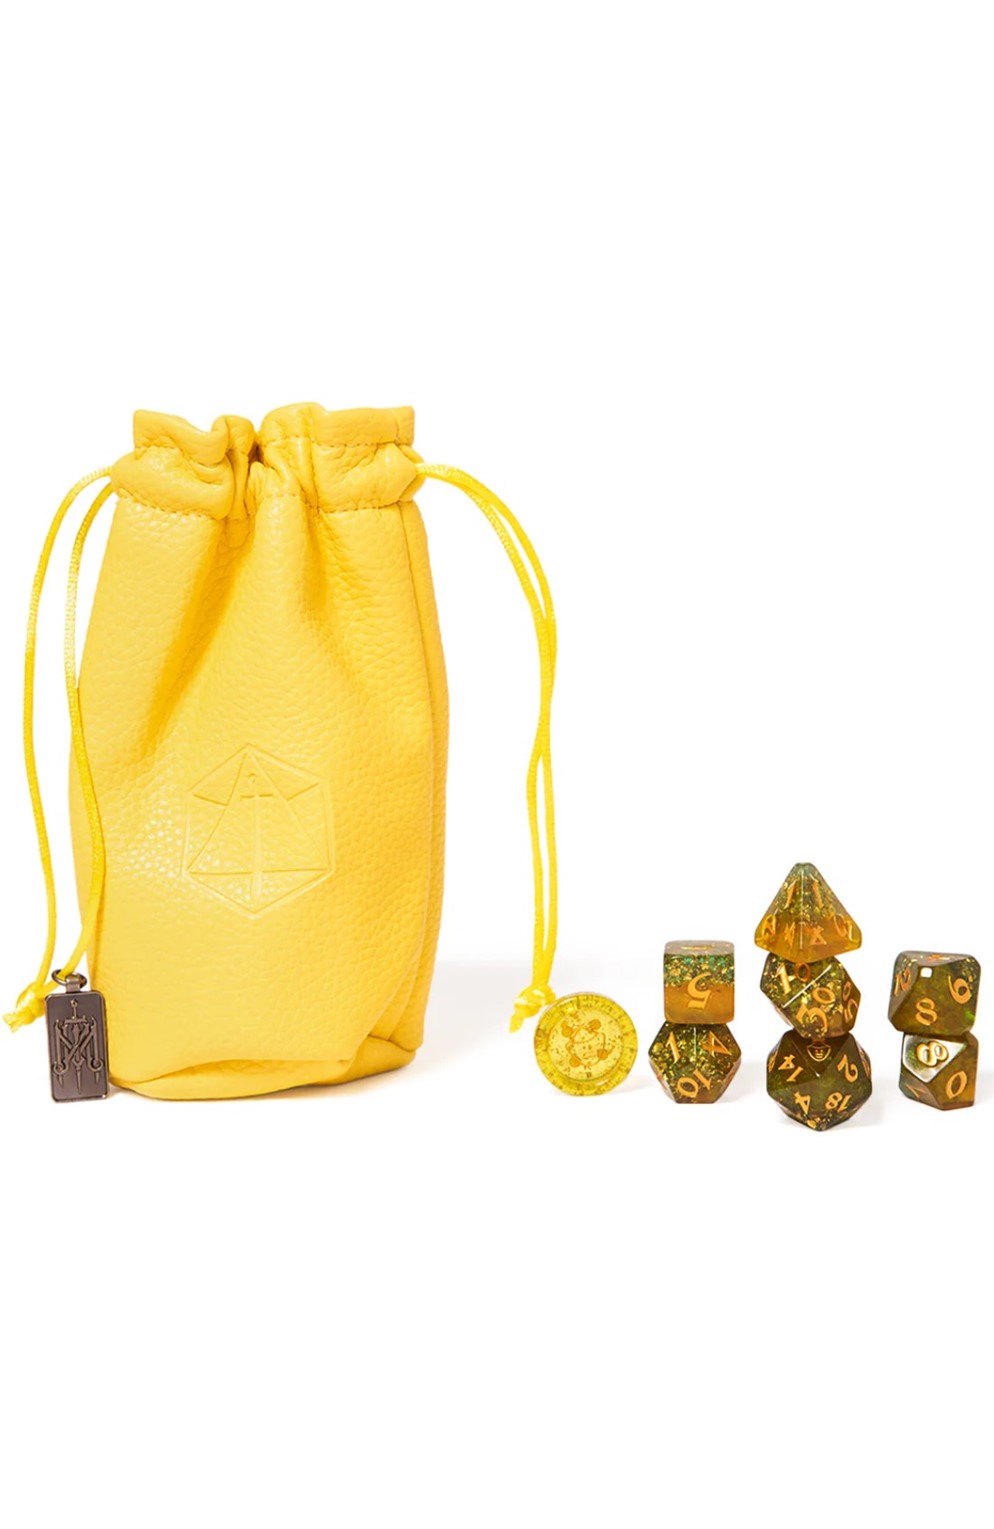 Critical Role: Mighty Nein Dice Set - Nott The Brave